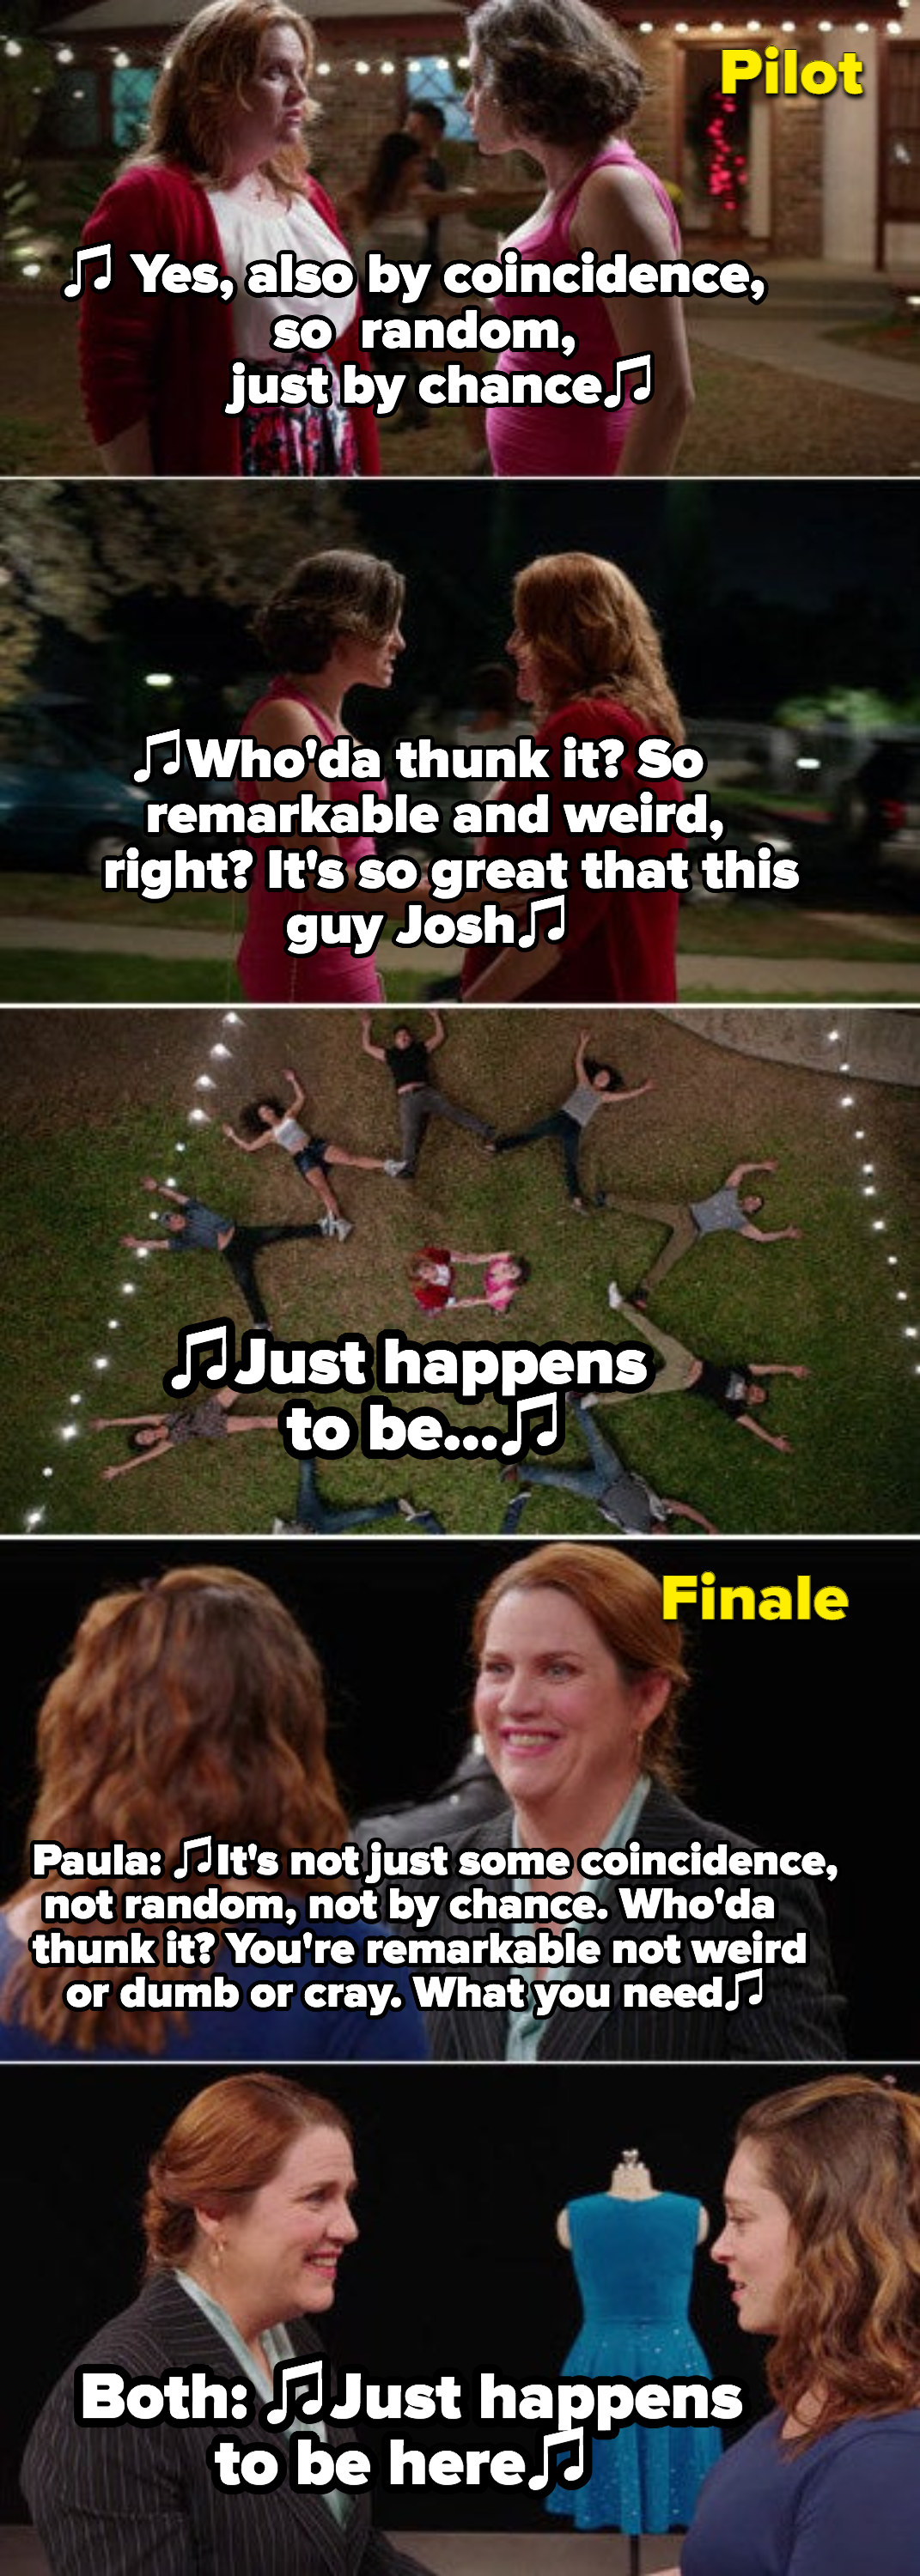 Rebecca and Paula reprising a song in the finale that they originally sung in the pilot